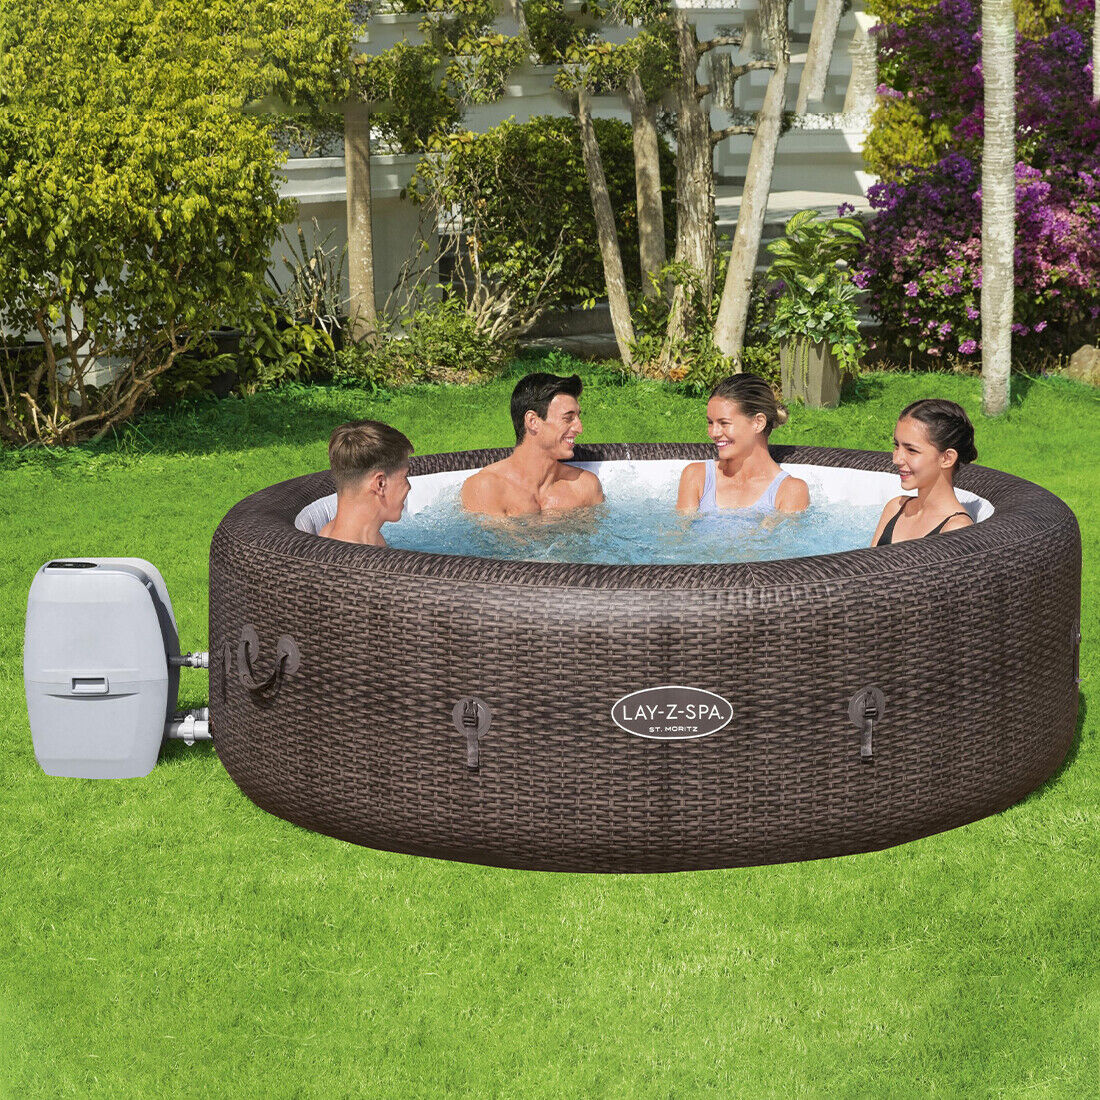 Gigantic! Bestway Lay-Z-Spa ST. MORITZ AirJet - Hot Tub Spa Massage - 180 Jets - 5 to 7 People